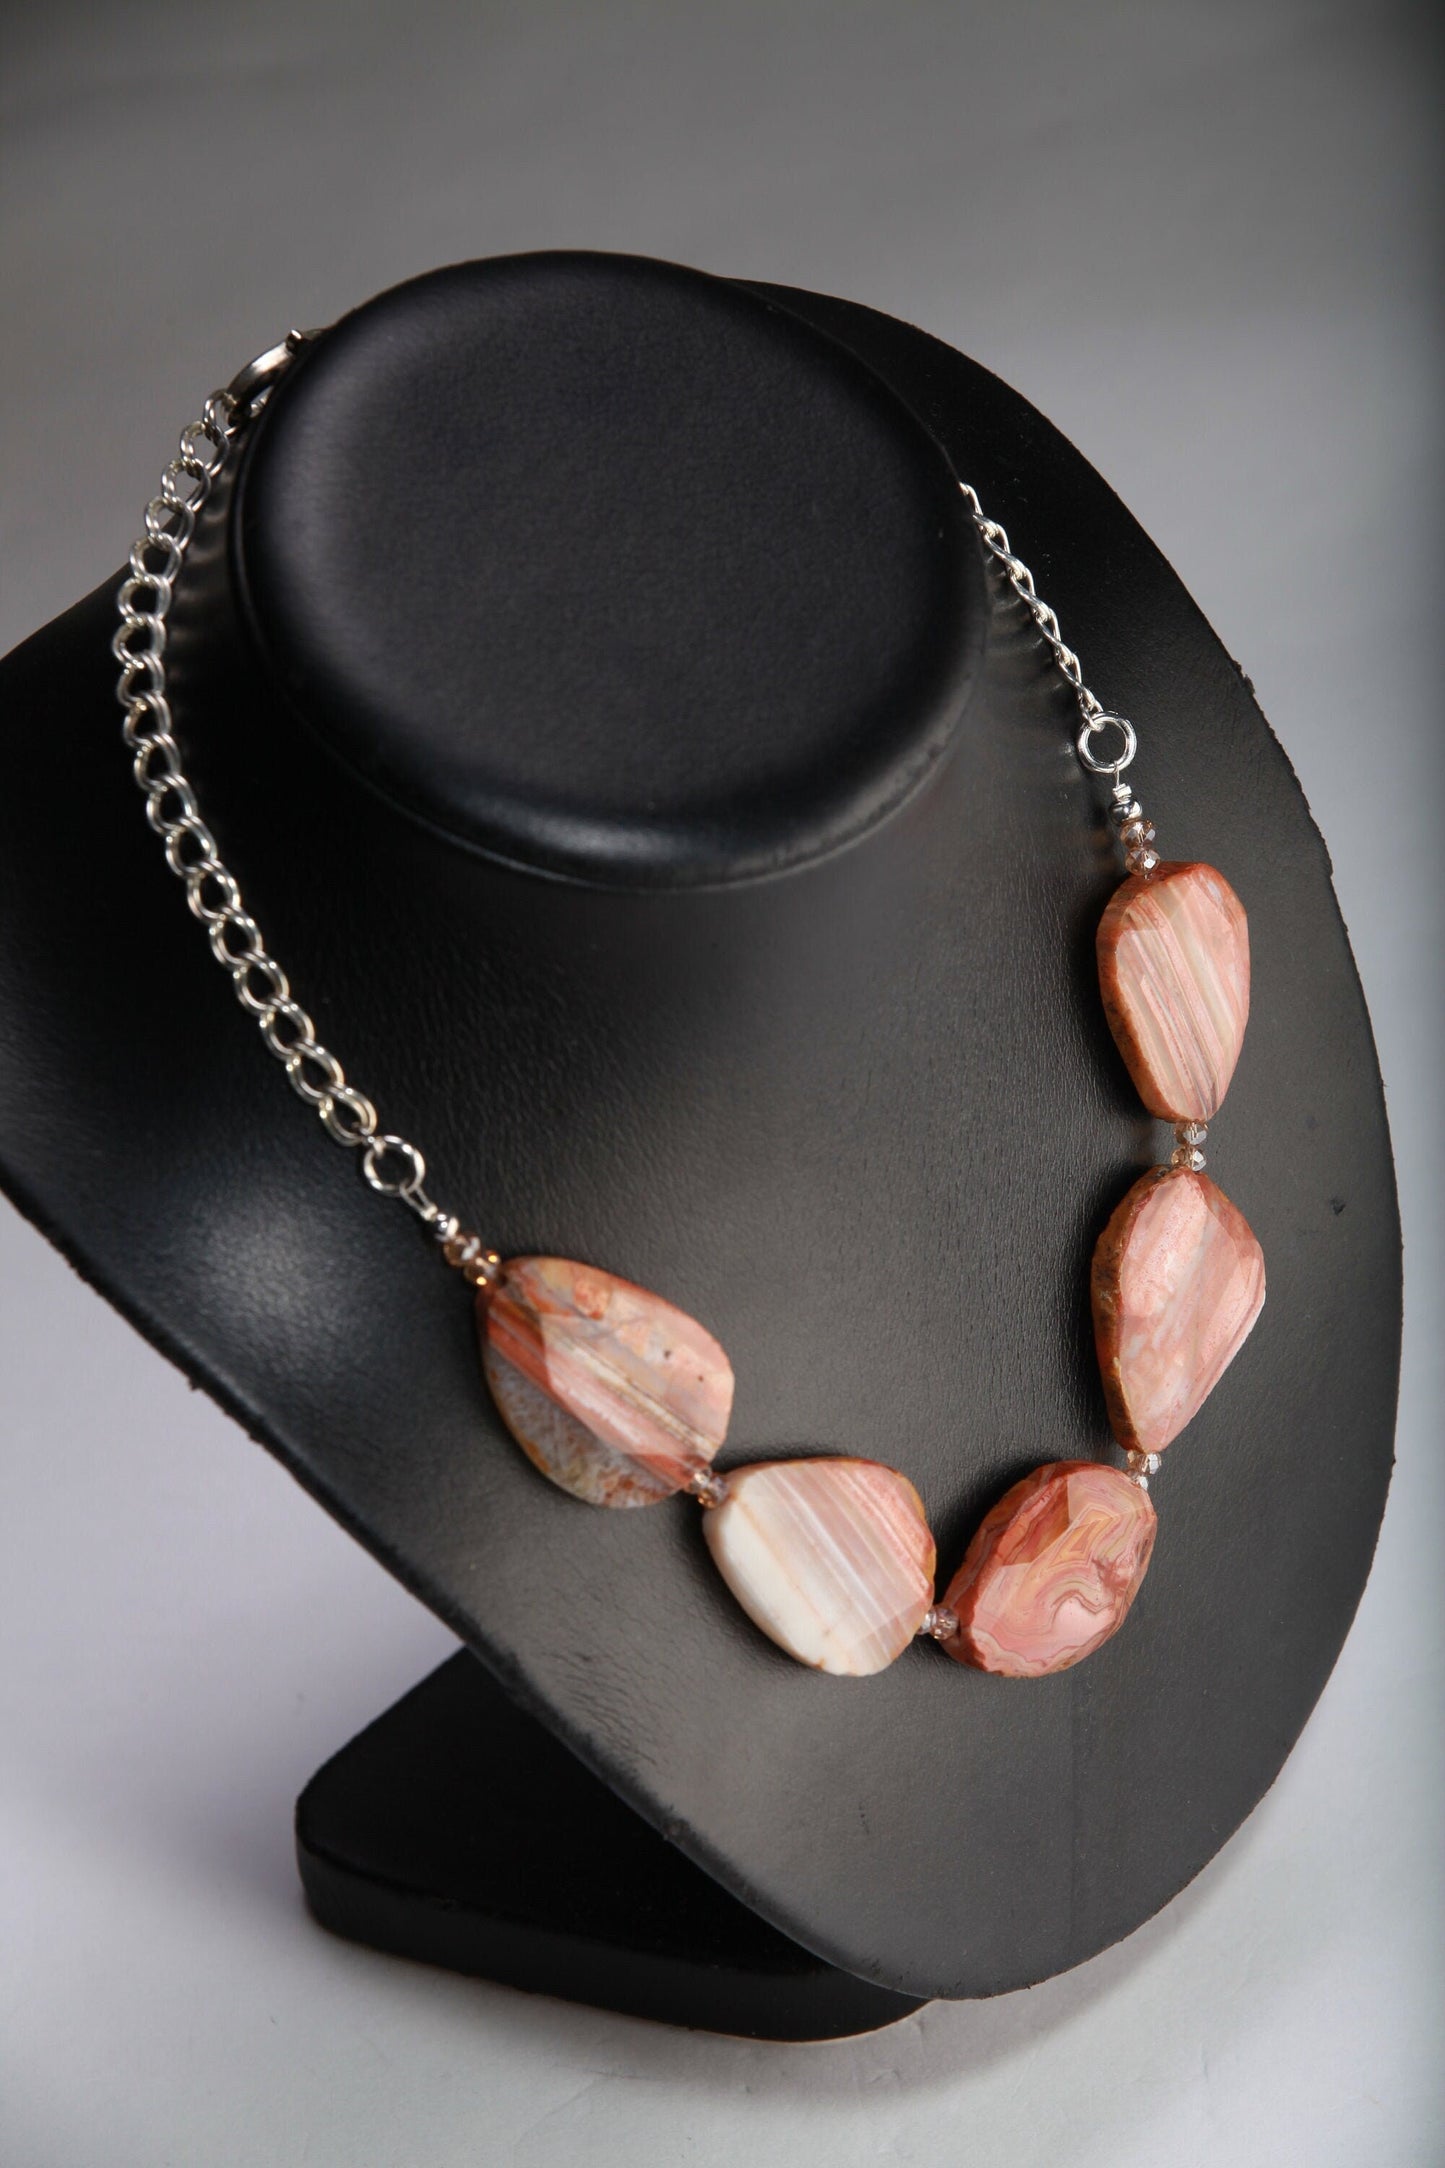 Botswana Agate with Double Cable Chain Necklace